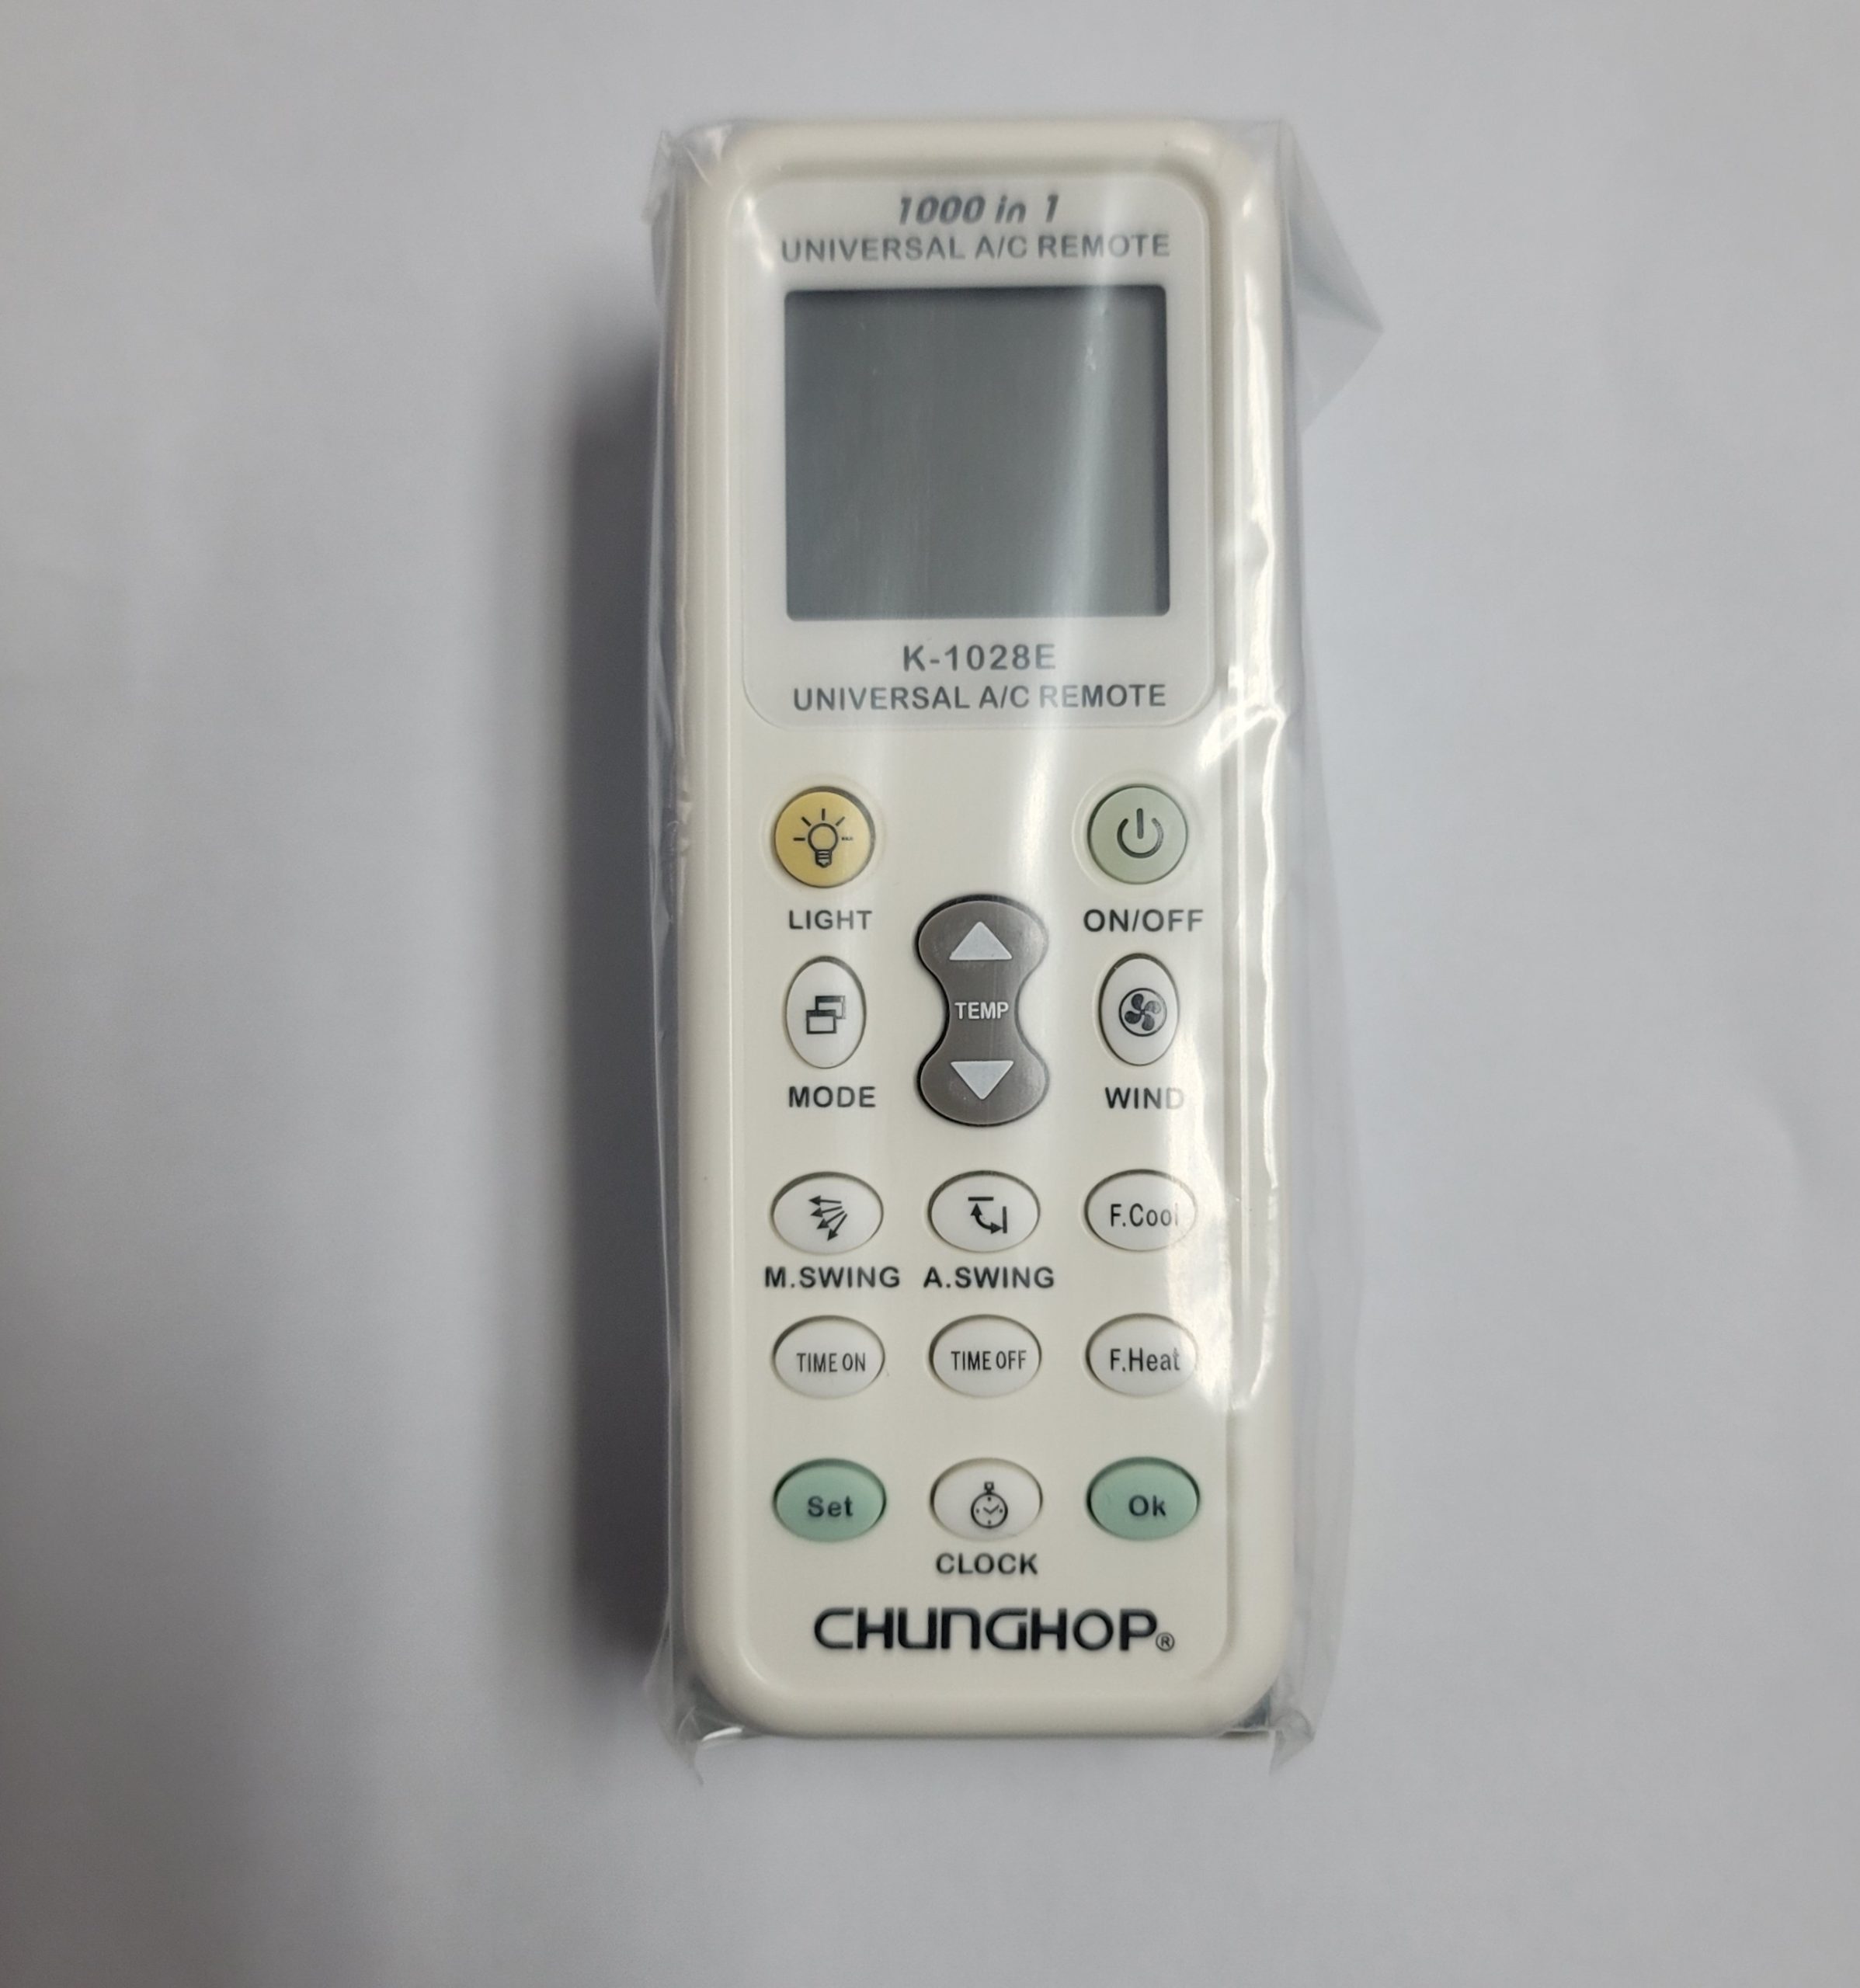 CHUNGHOP Universal A/C Remote K-1028E for sale in Jamaica 